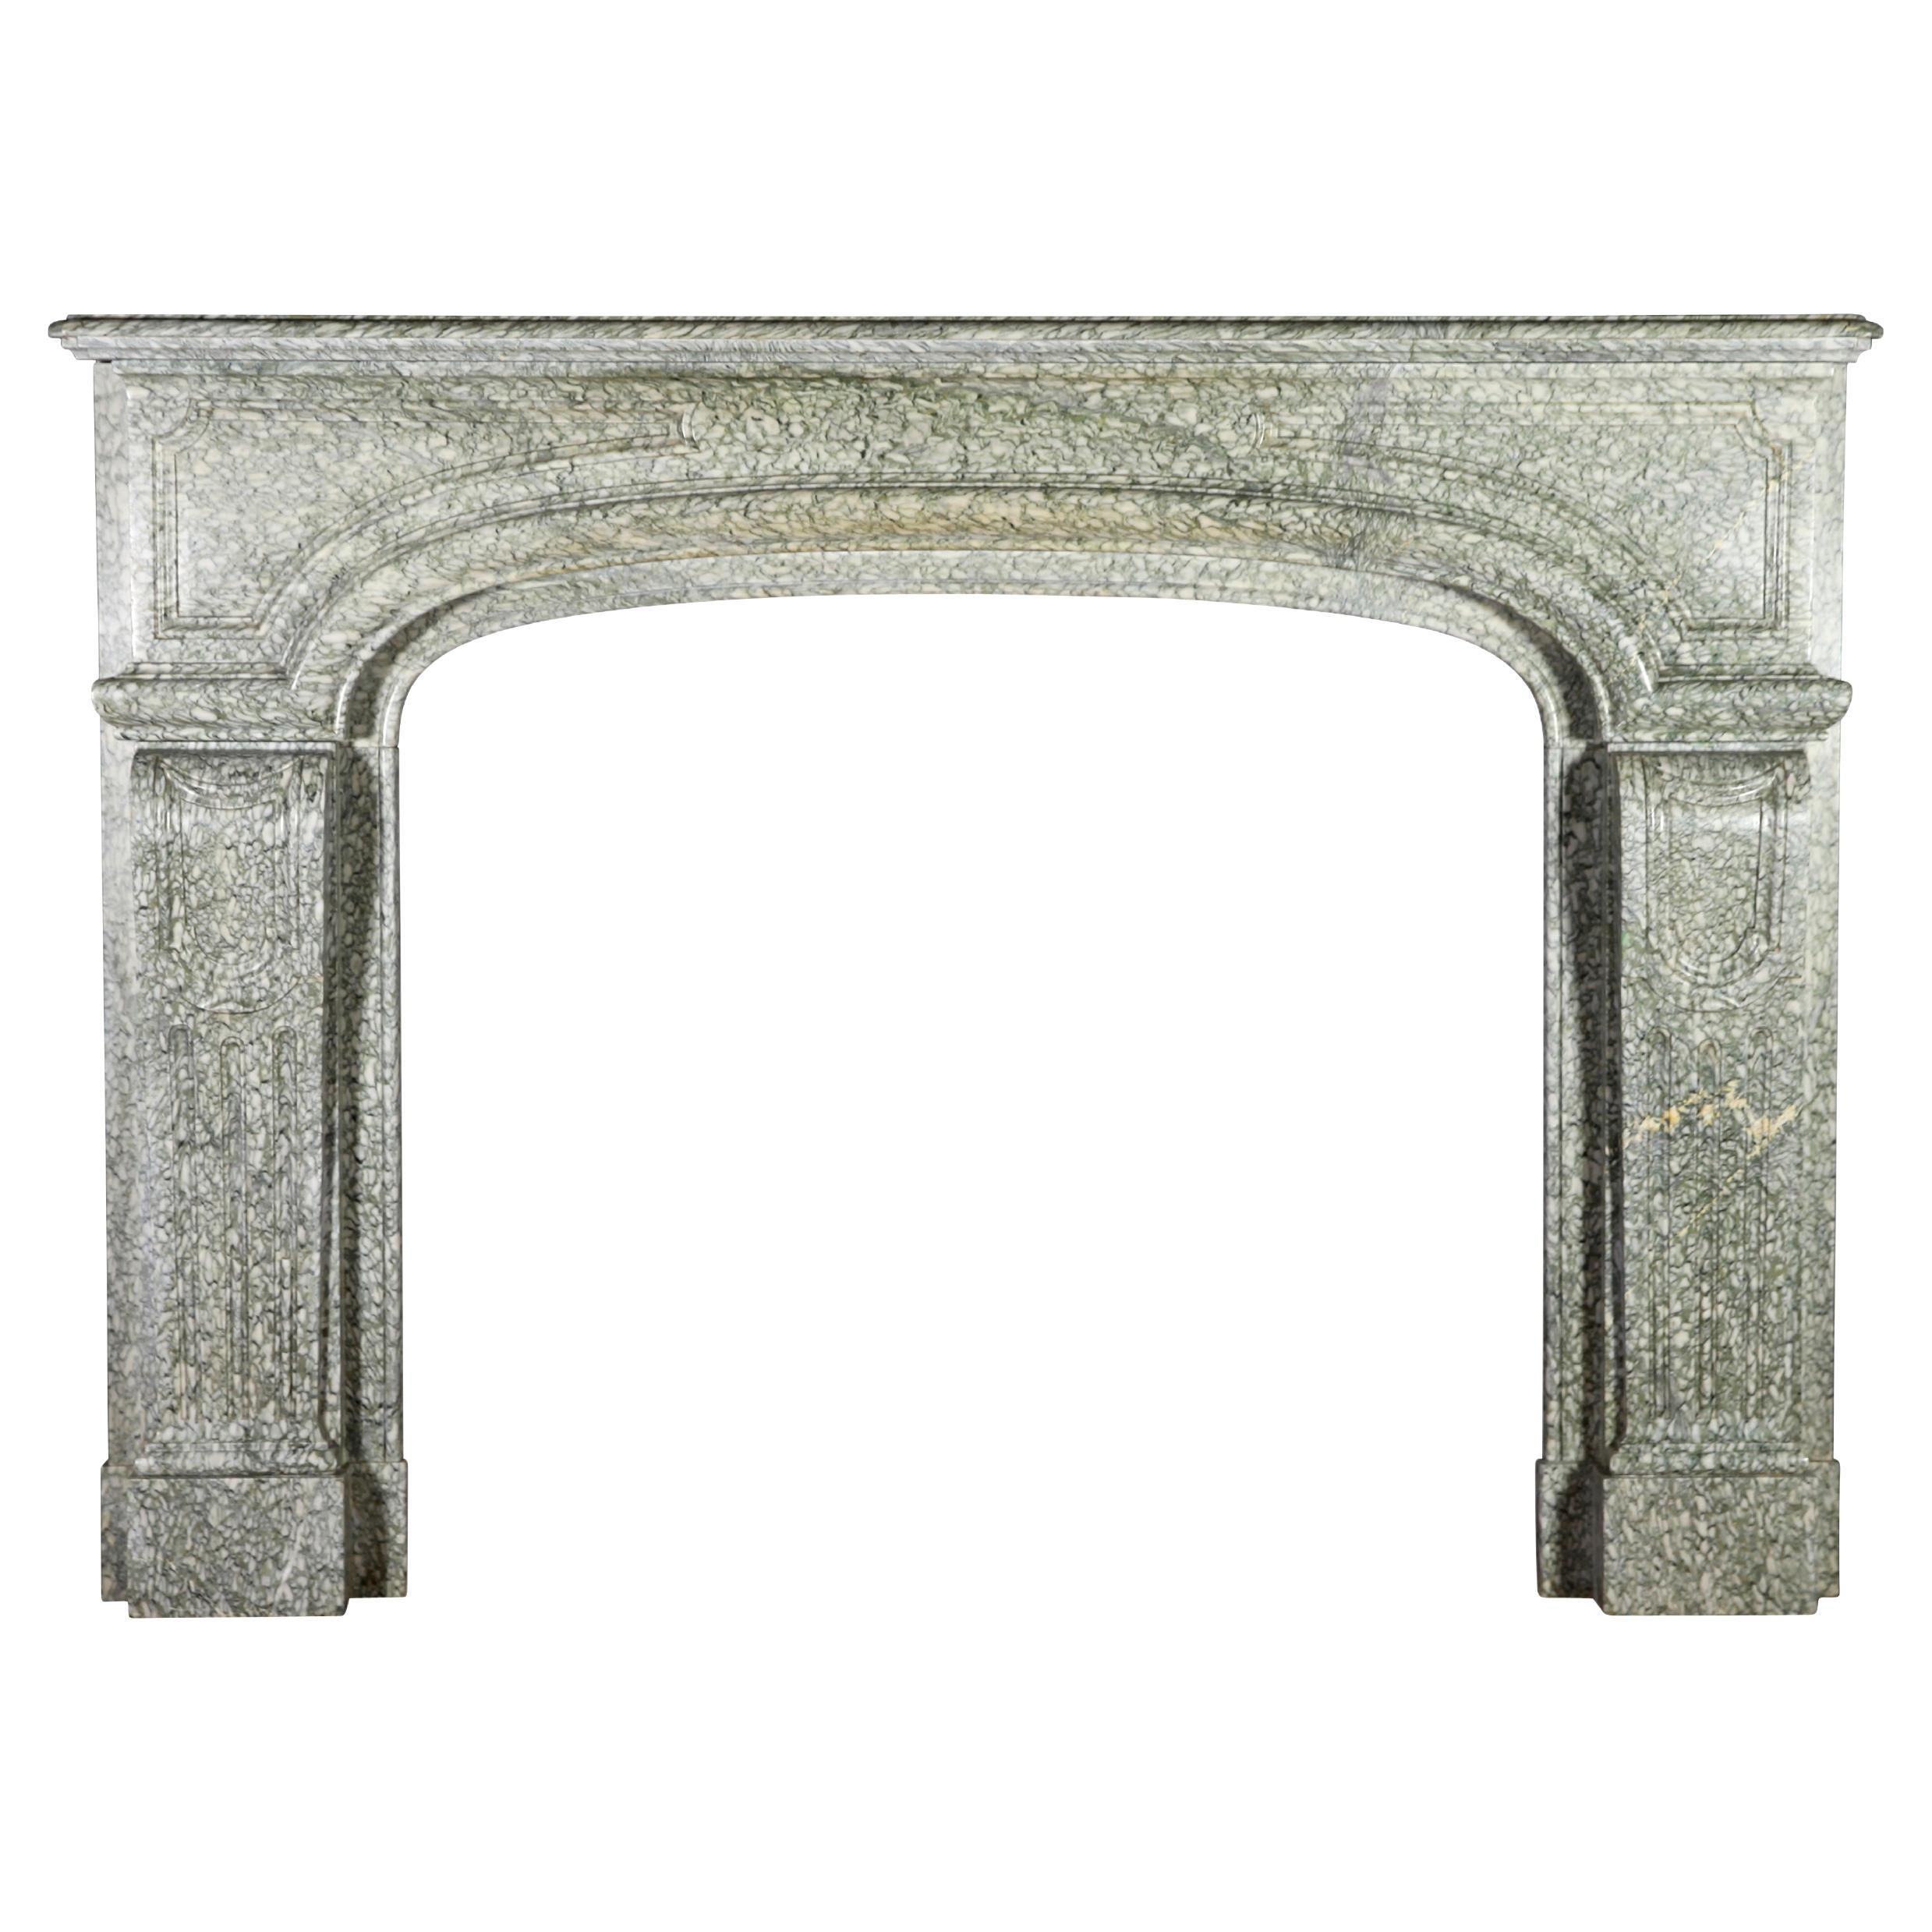 French Campan Vert Marble Vintage Fireplace Surround For Sale